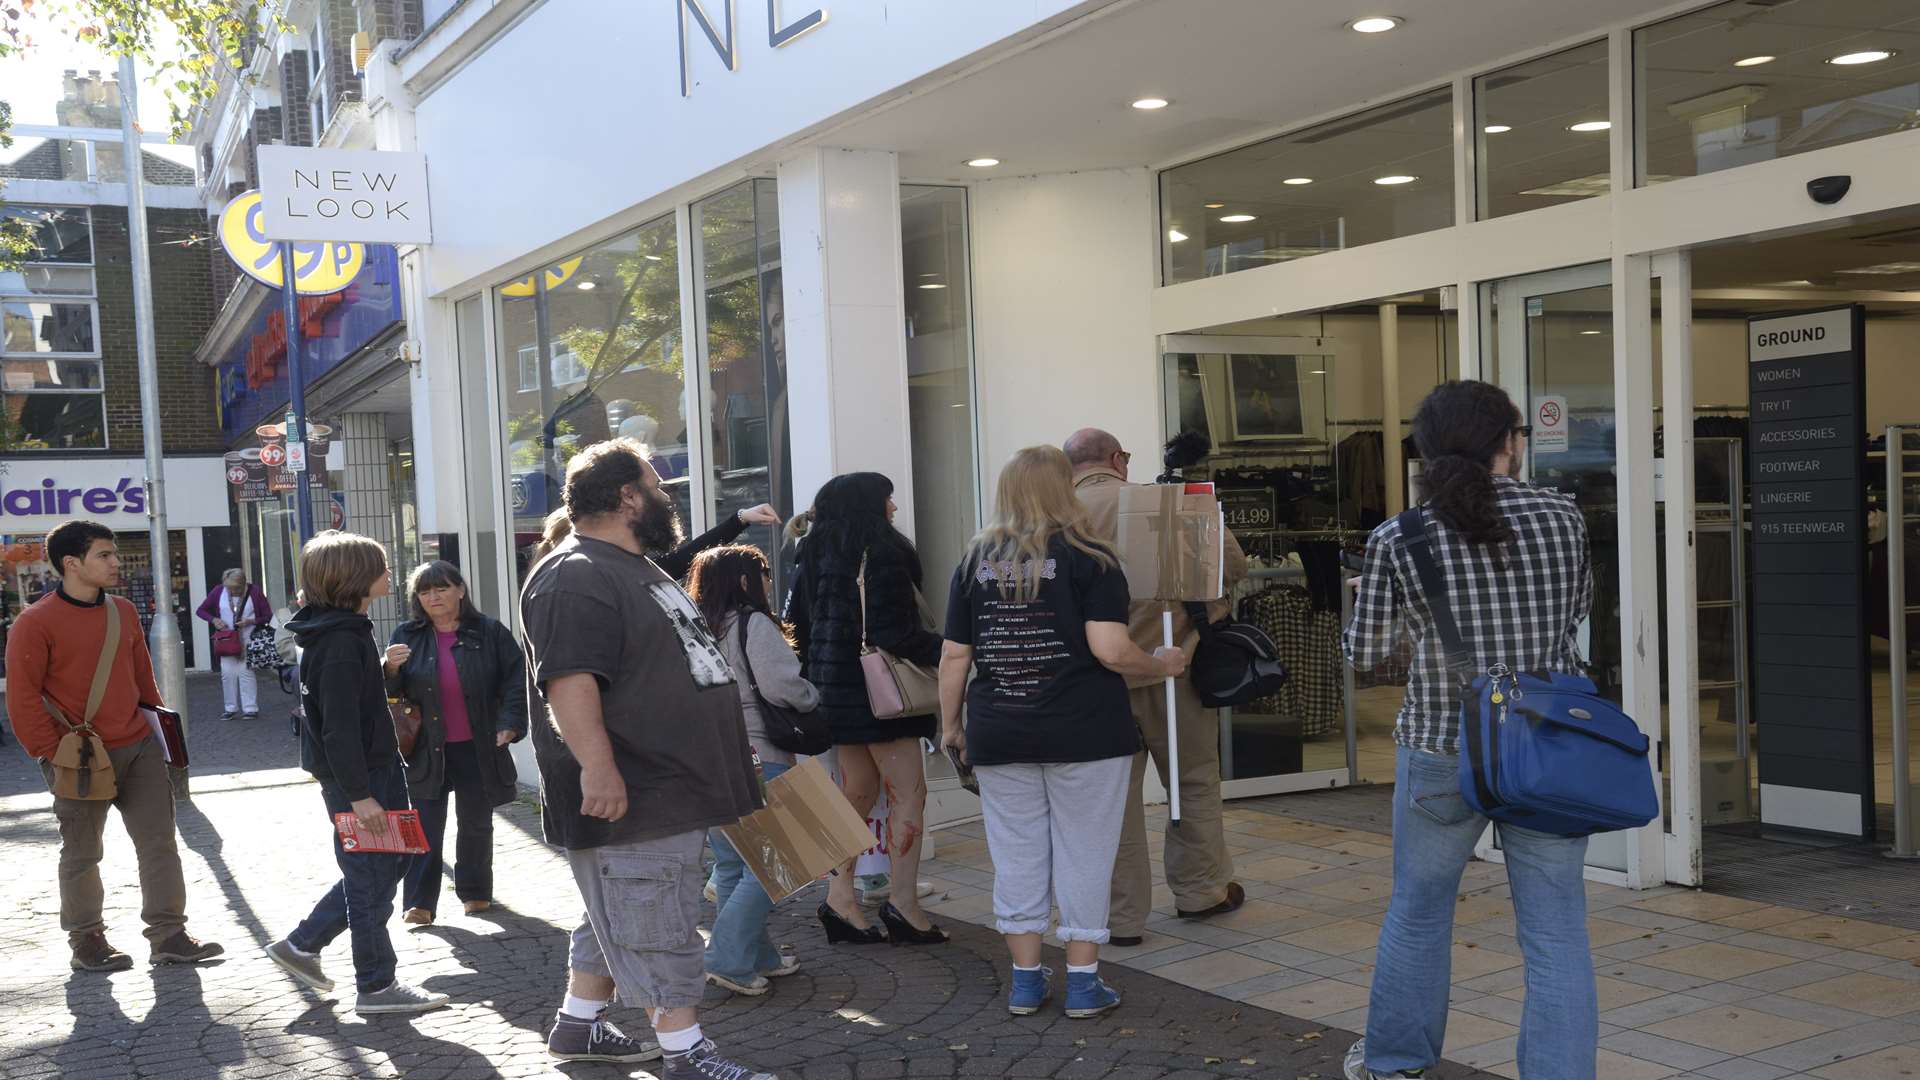 Animal rights campaigners before entering New Look